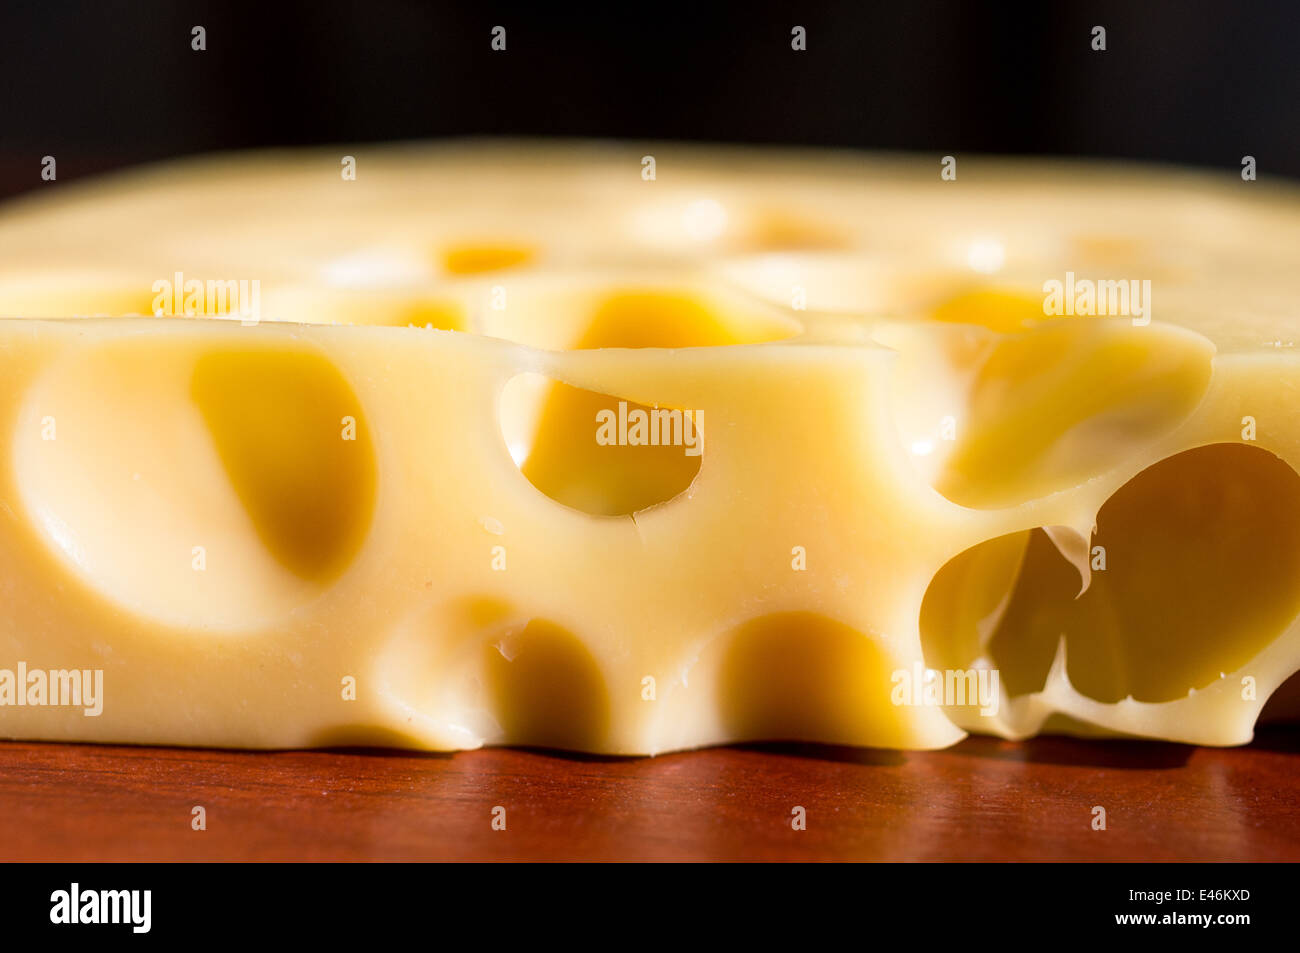 Piece of cheese with holes closeup Stock Photo